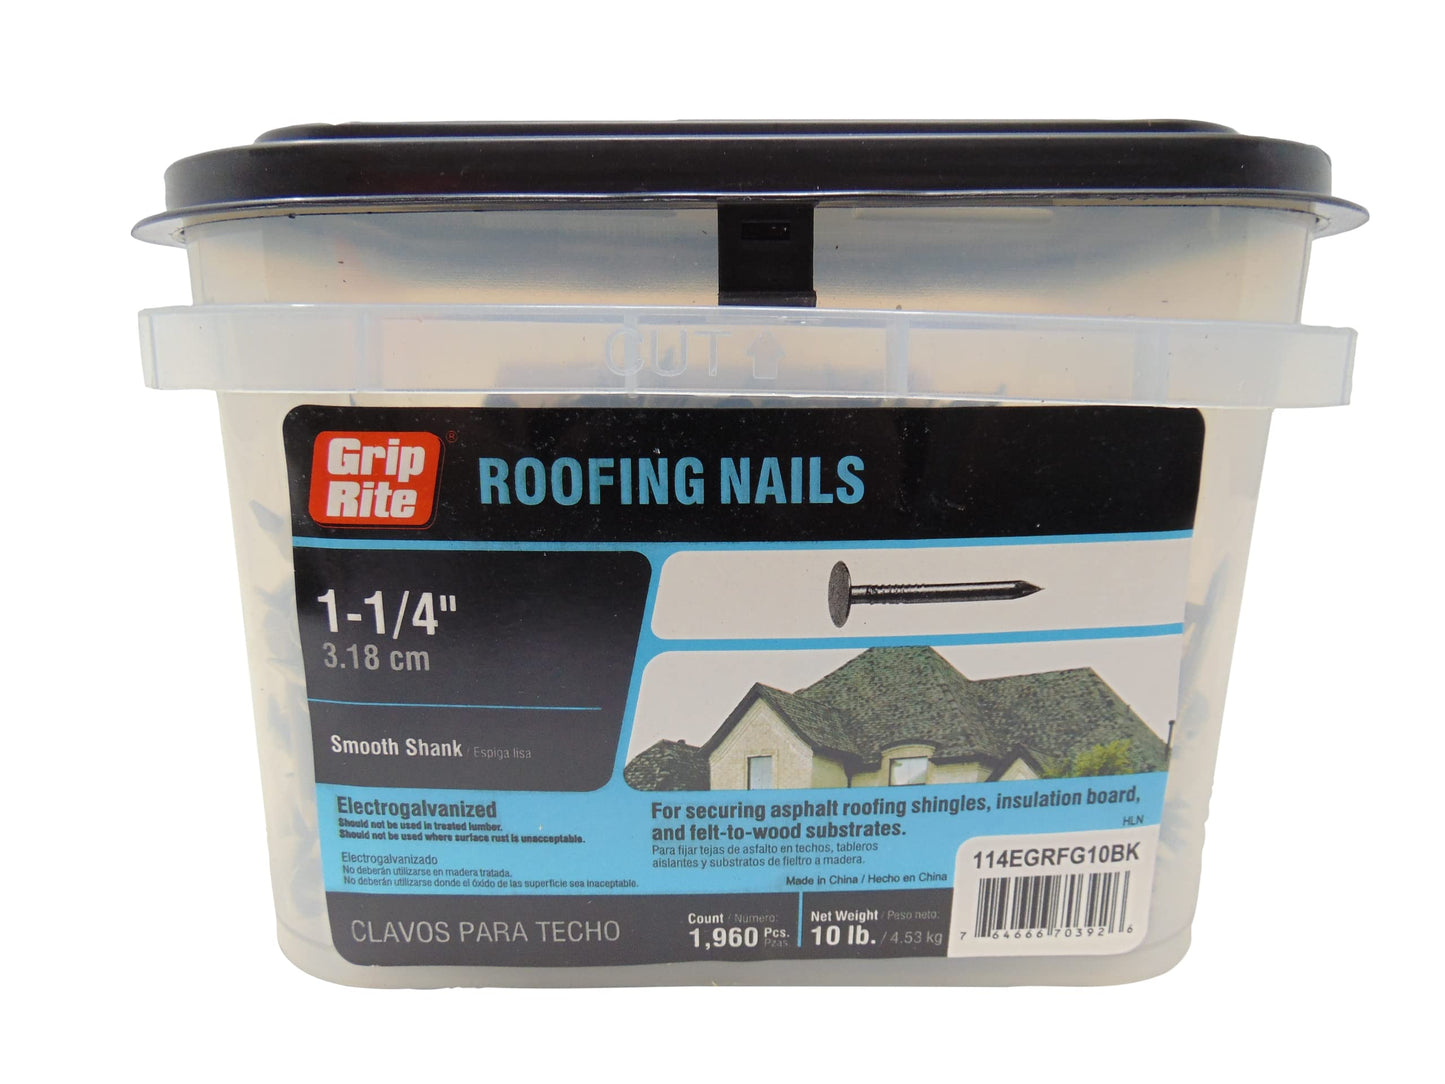 Grip Rite 114EGRFG10BK 1-1/4-inch Electro Galvanized Smooth Shank Bulk Roof Nails 1,960 count, 10lbs.